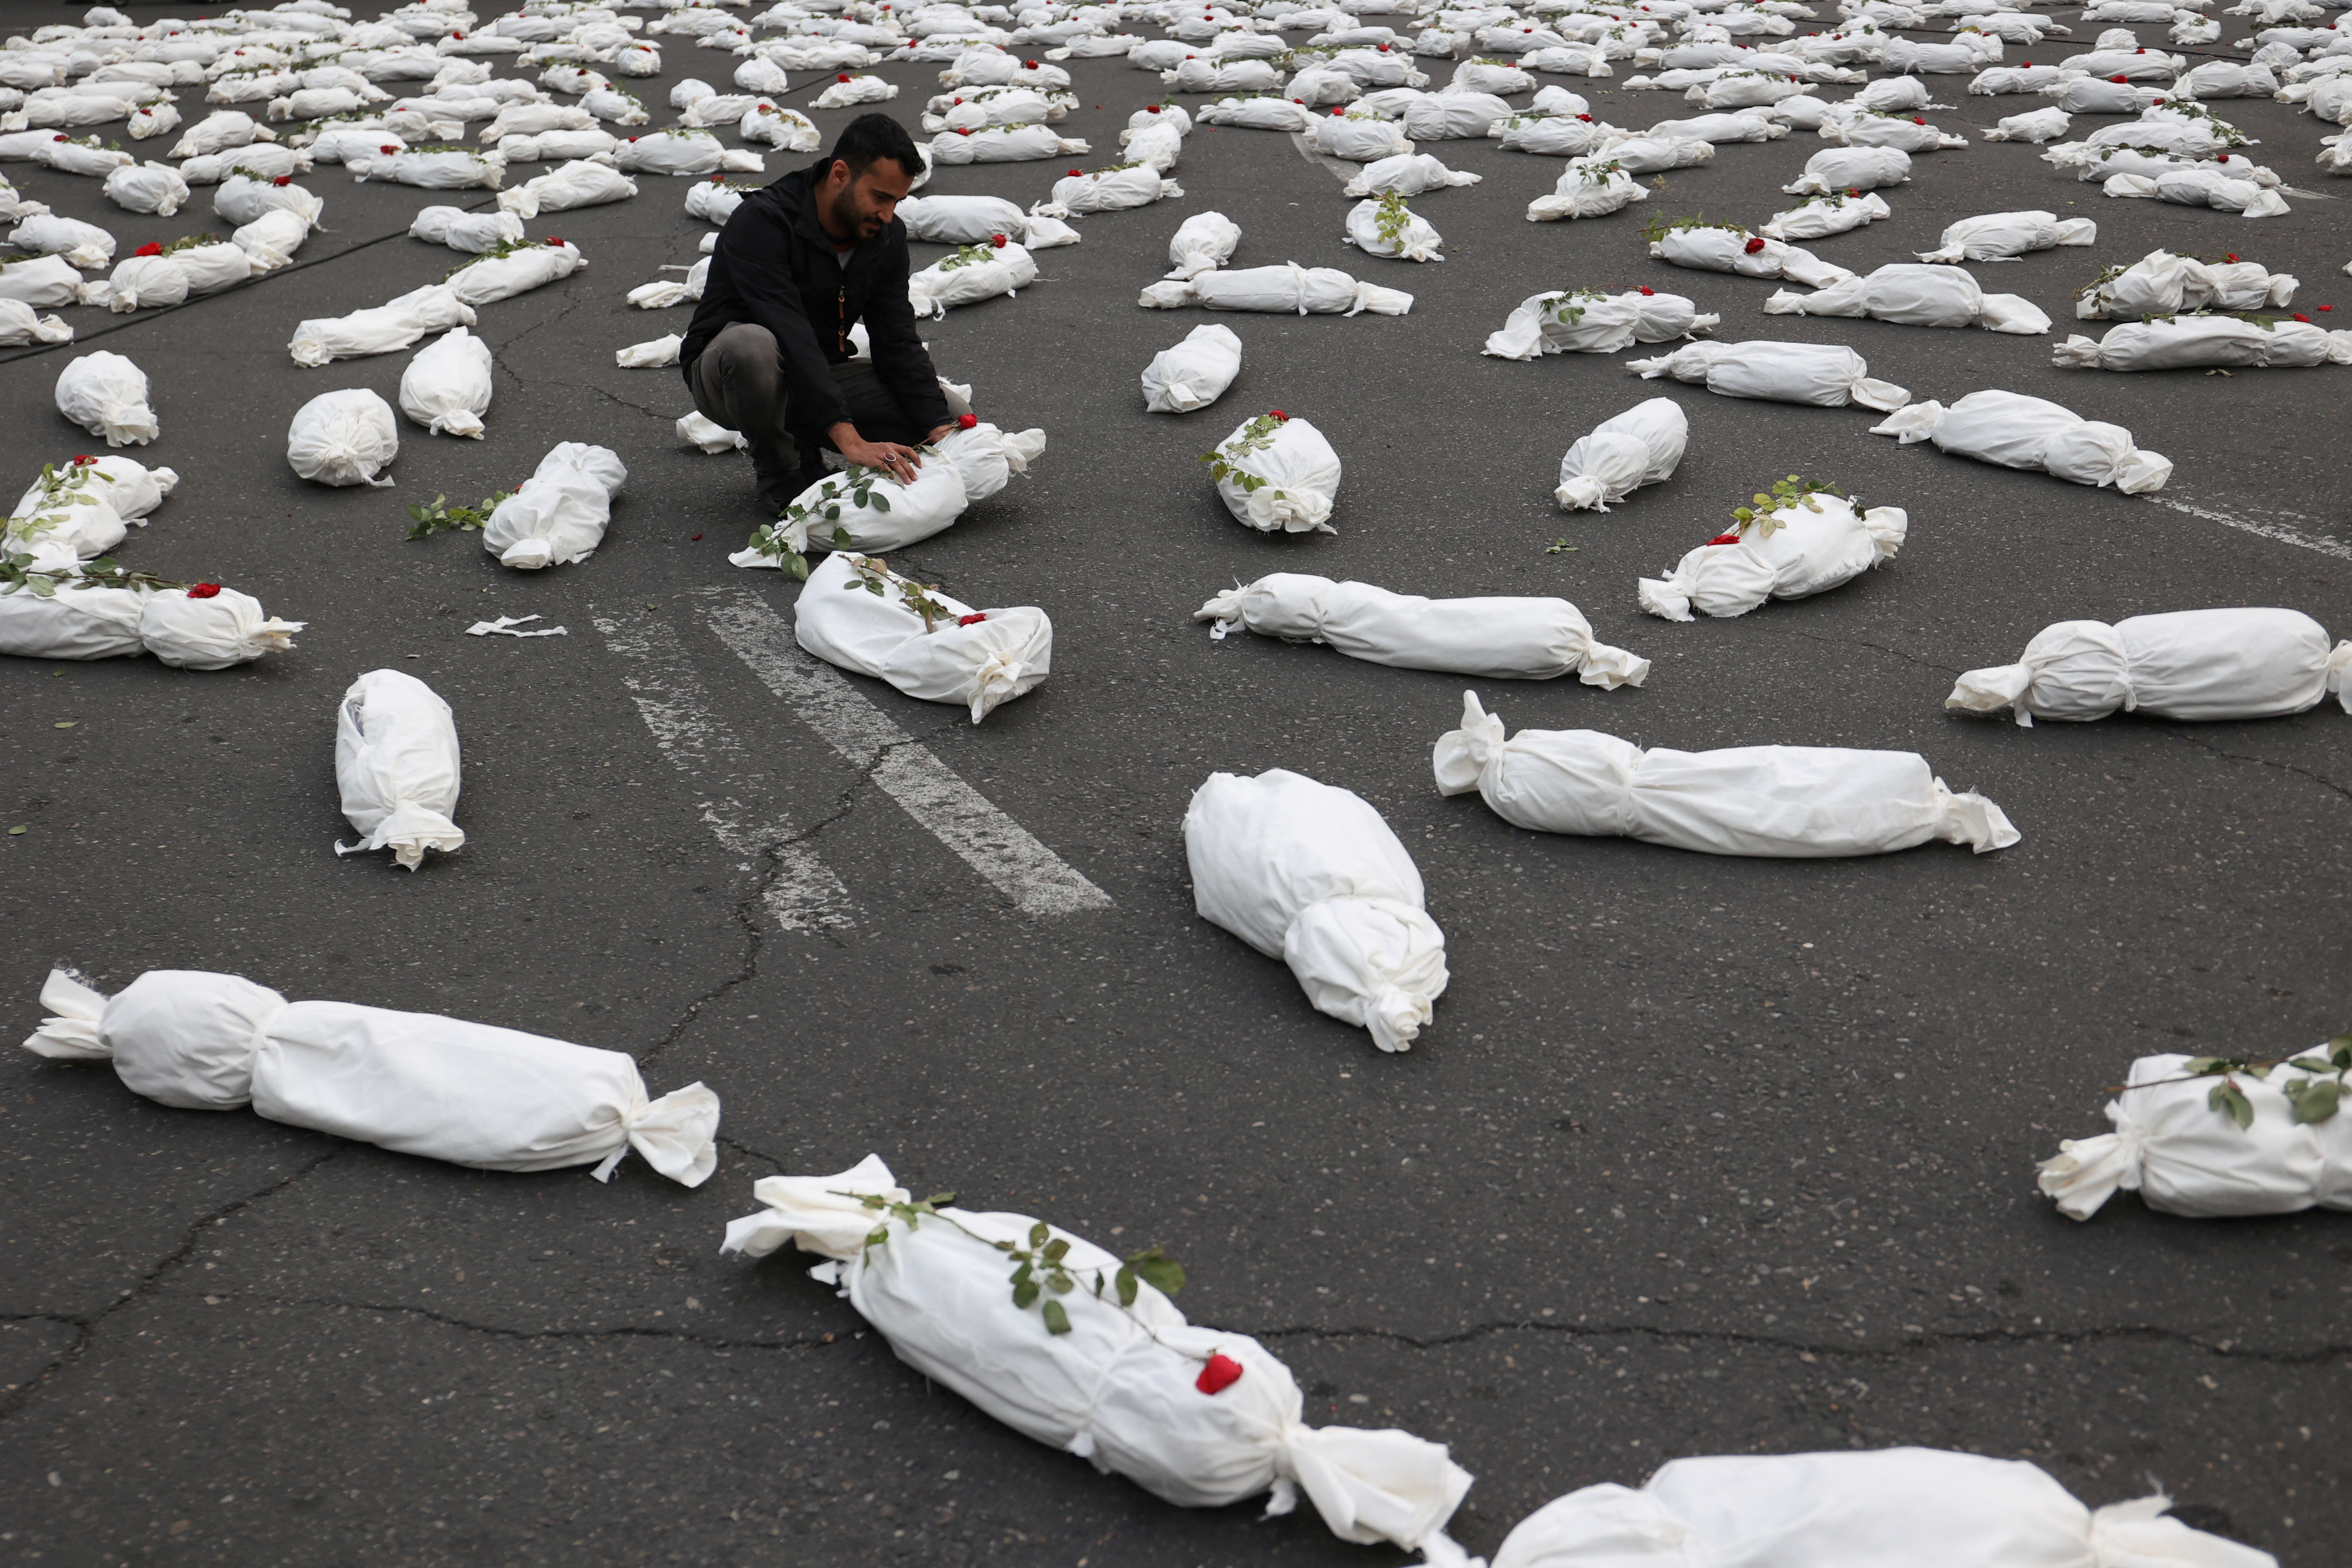 An Iranian man sits next to the symbolic shrouds of Gaza children's dead bodies during a gesture in a street in Tehran